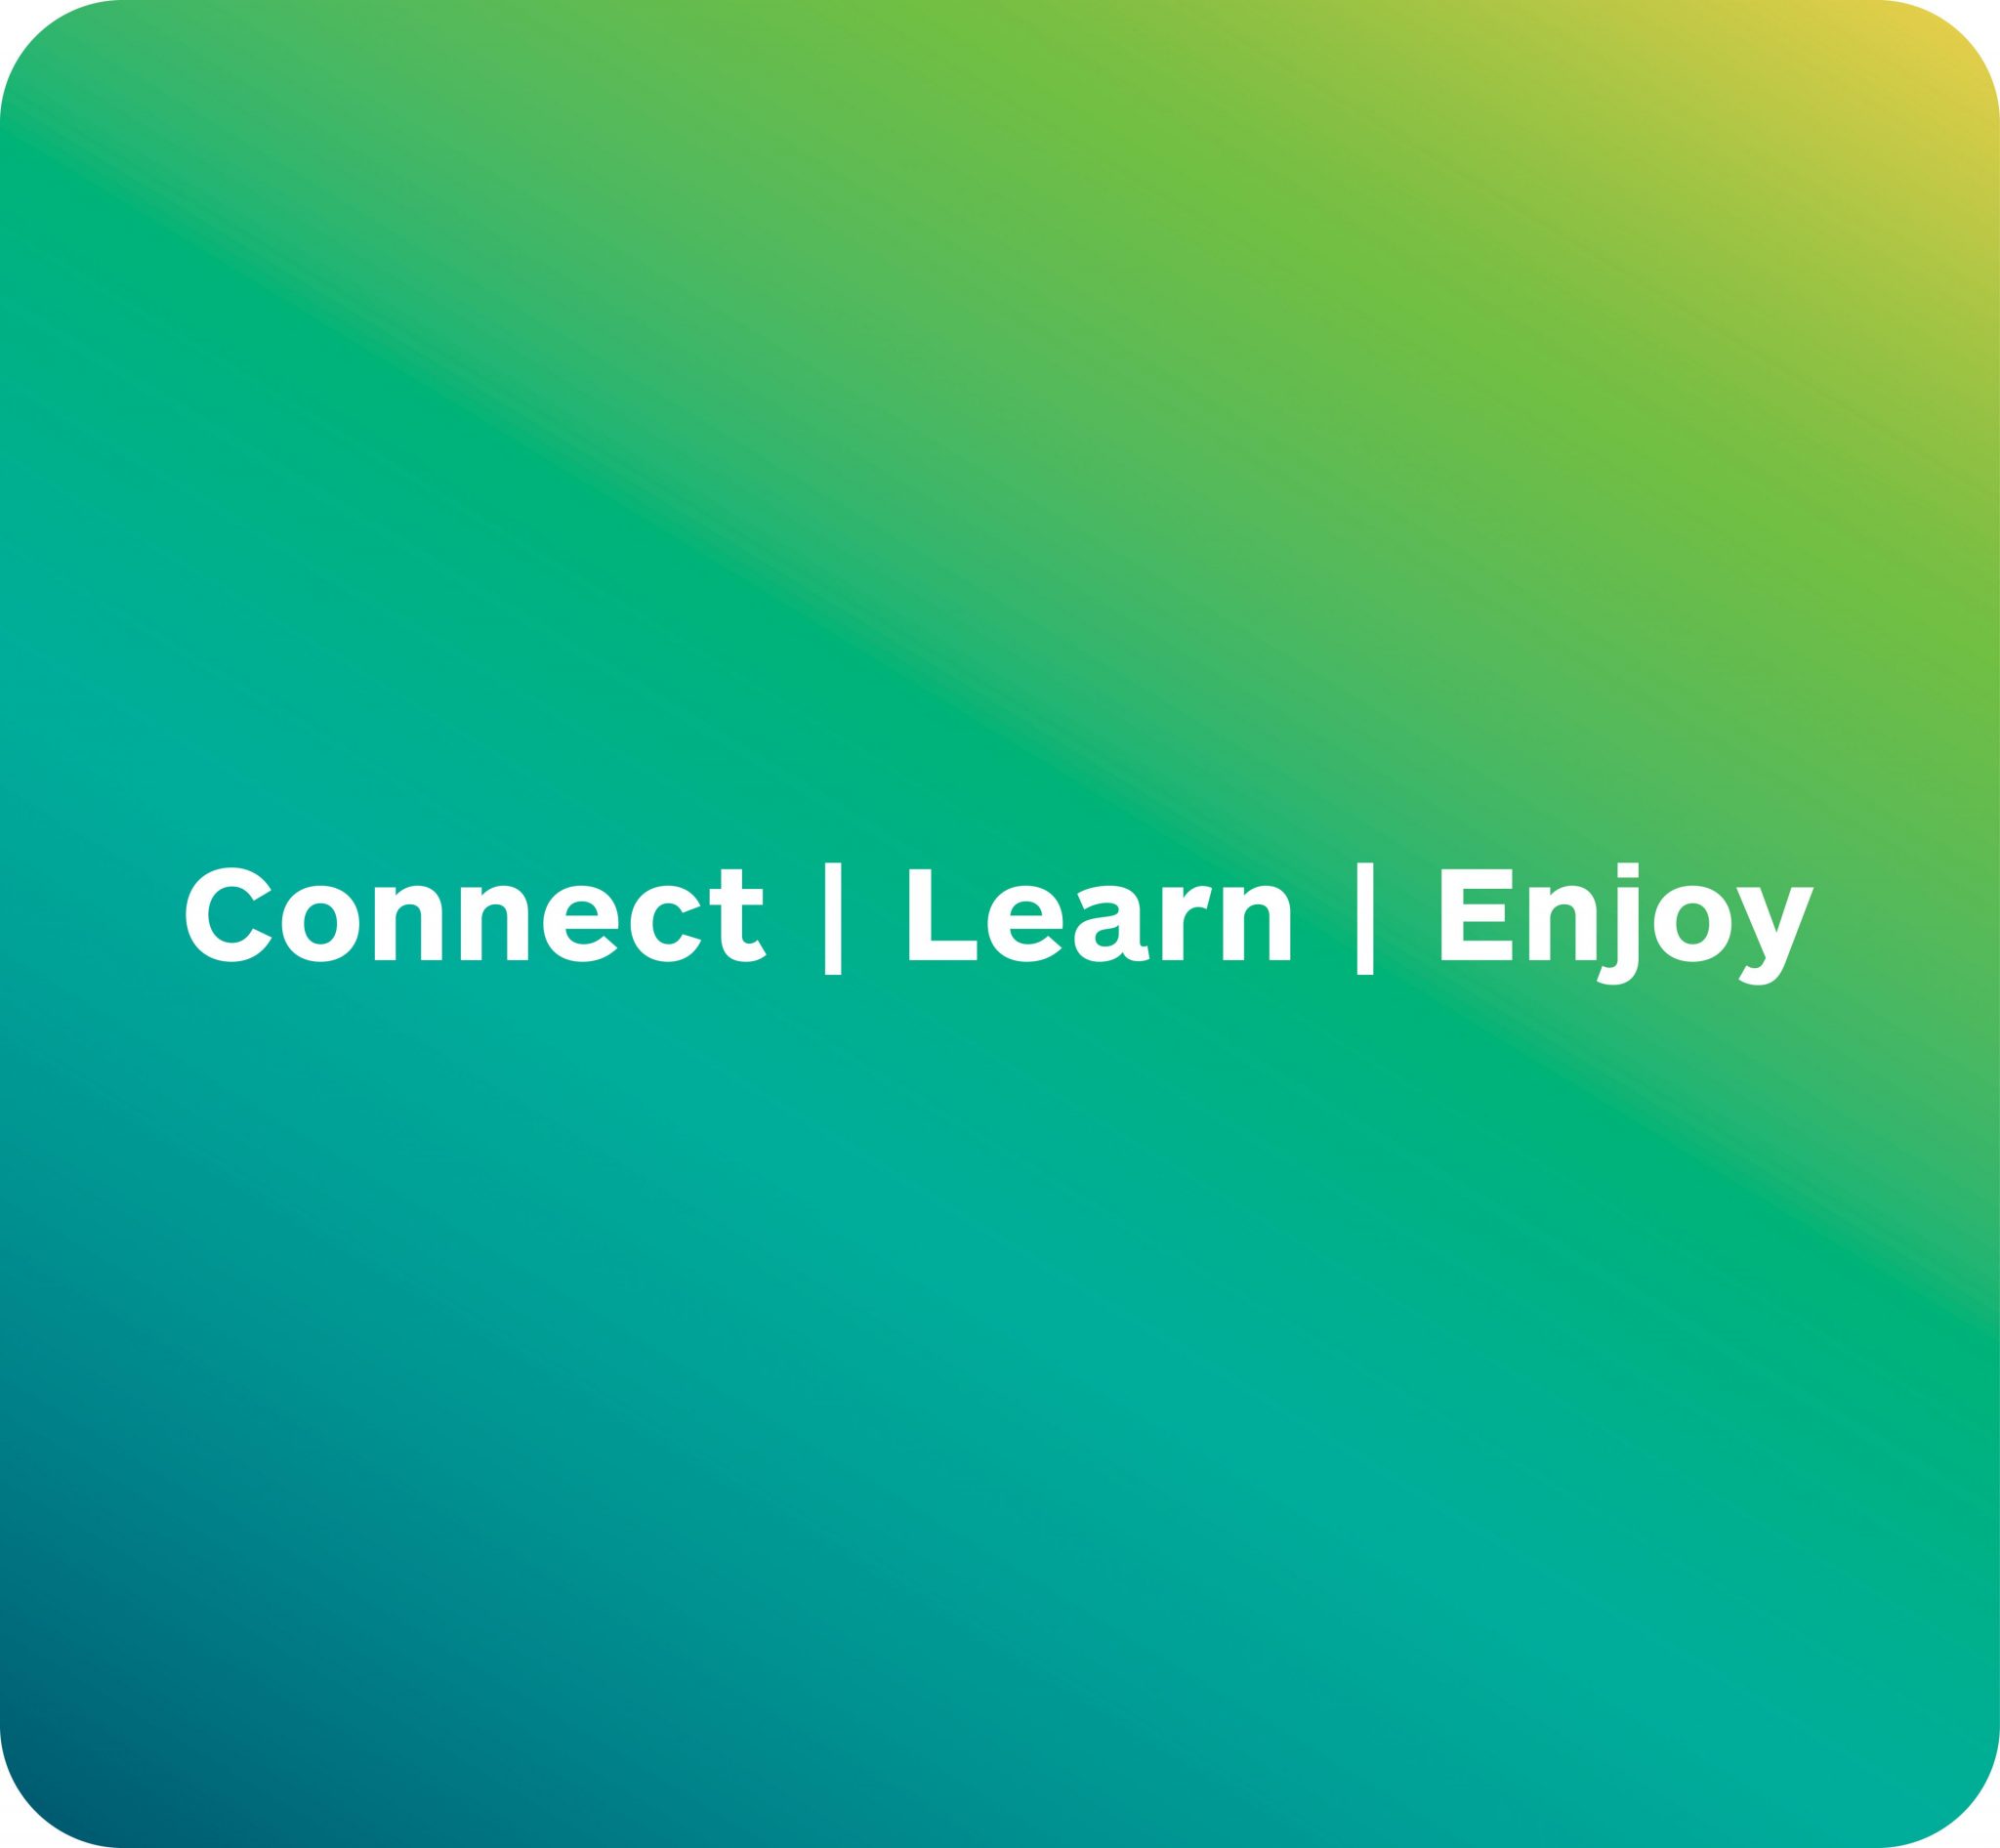 solution streams, connect, learn, enjoy developed as part of brand strategy project